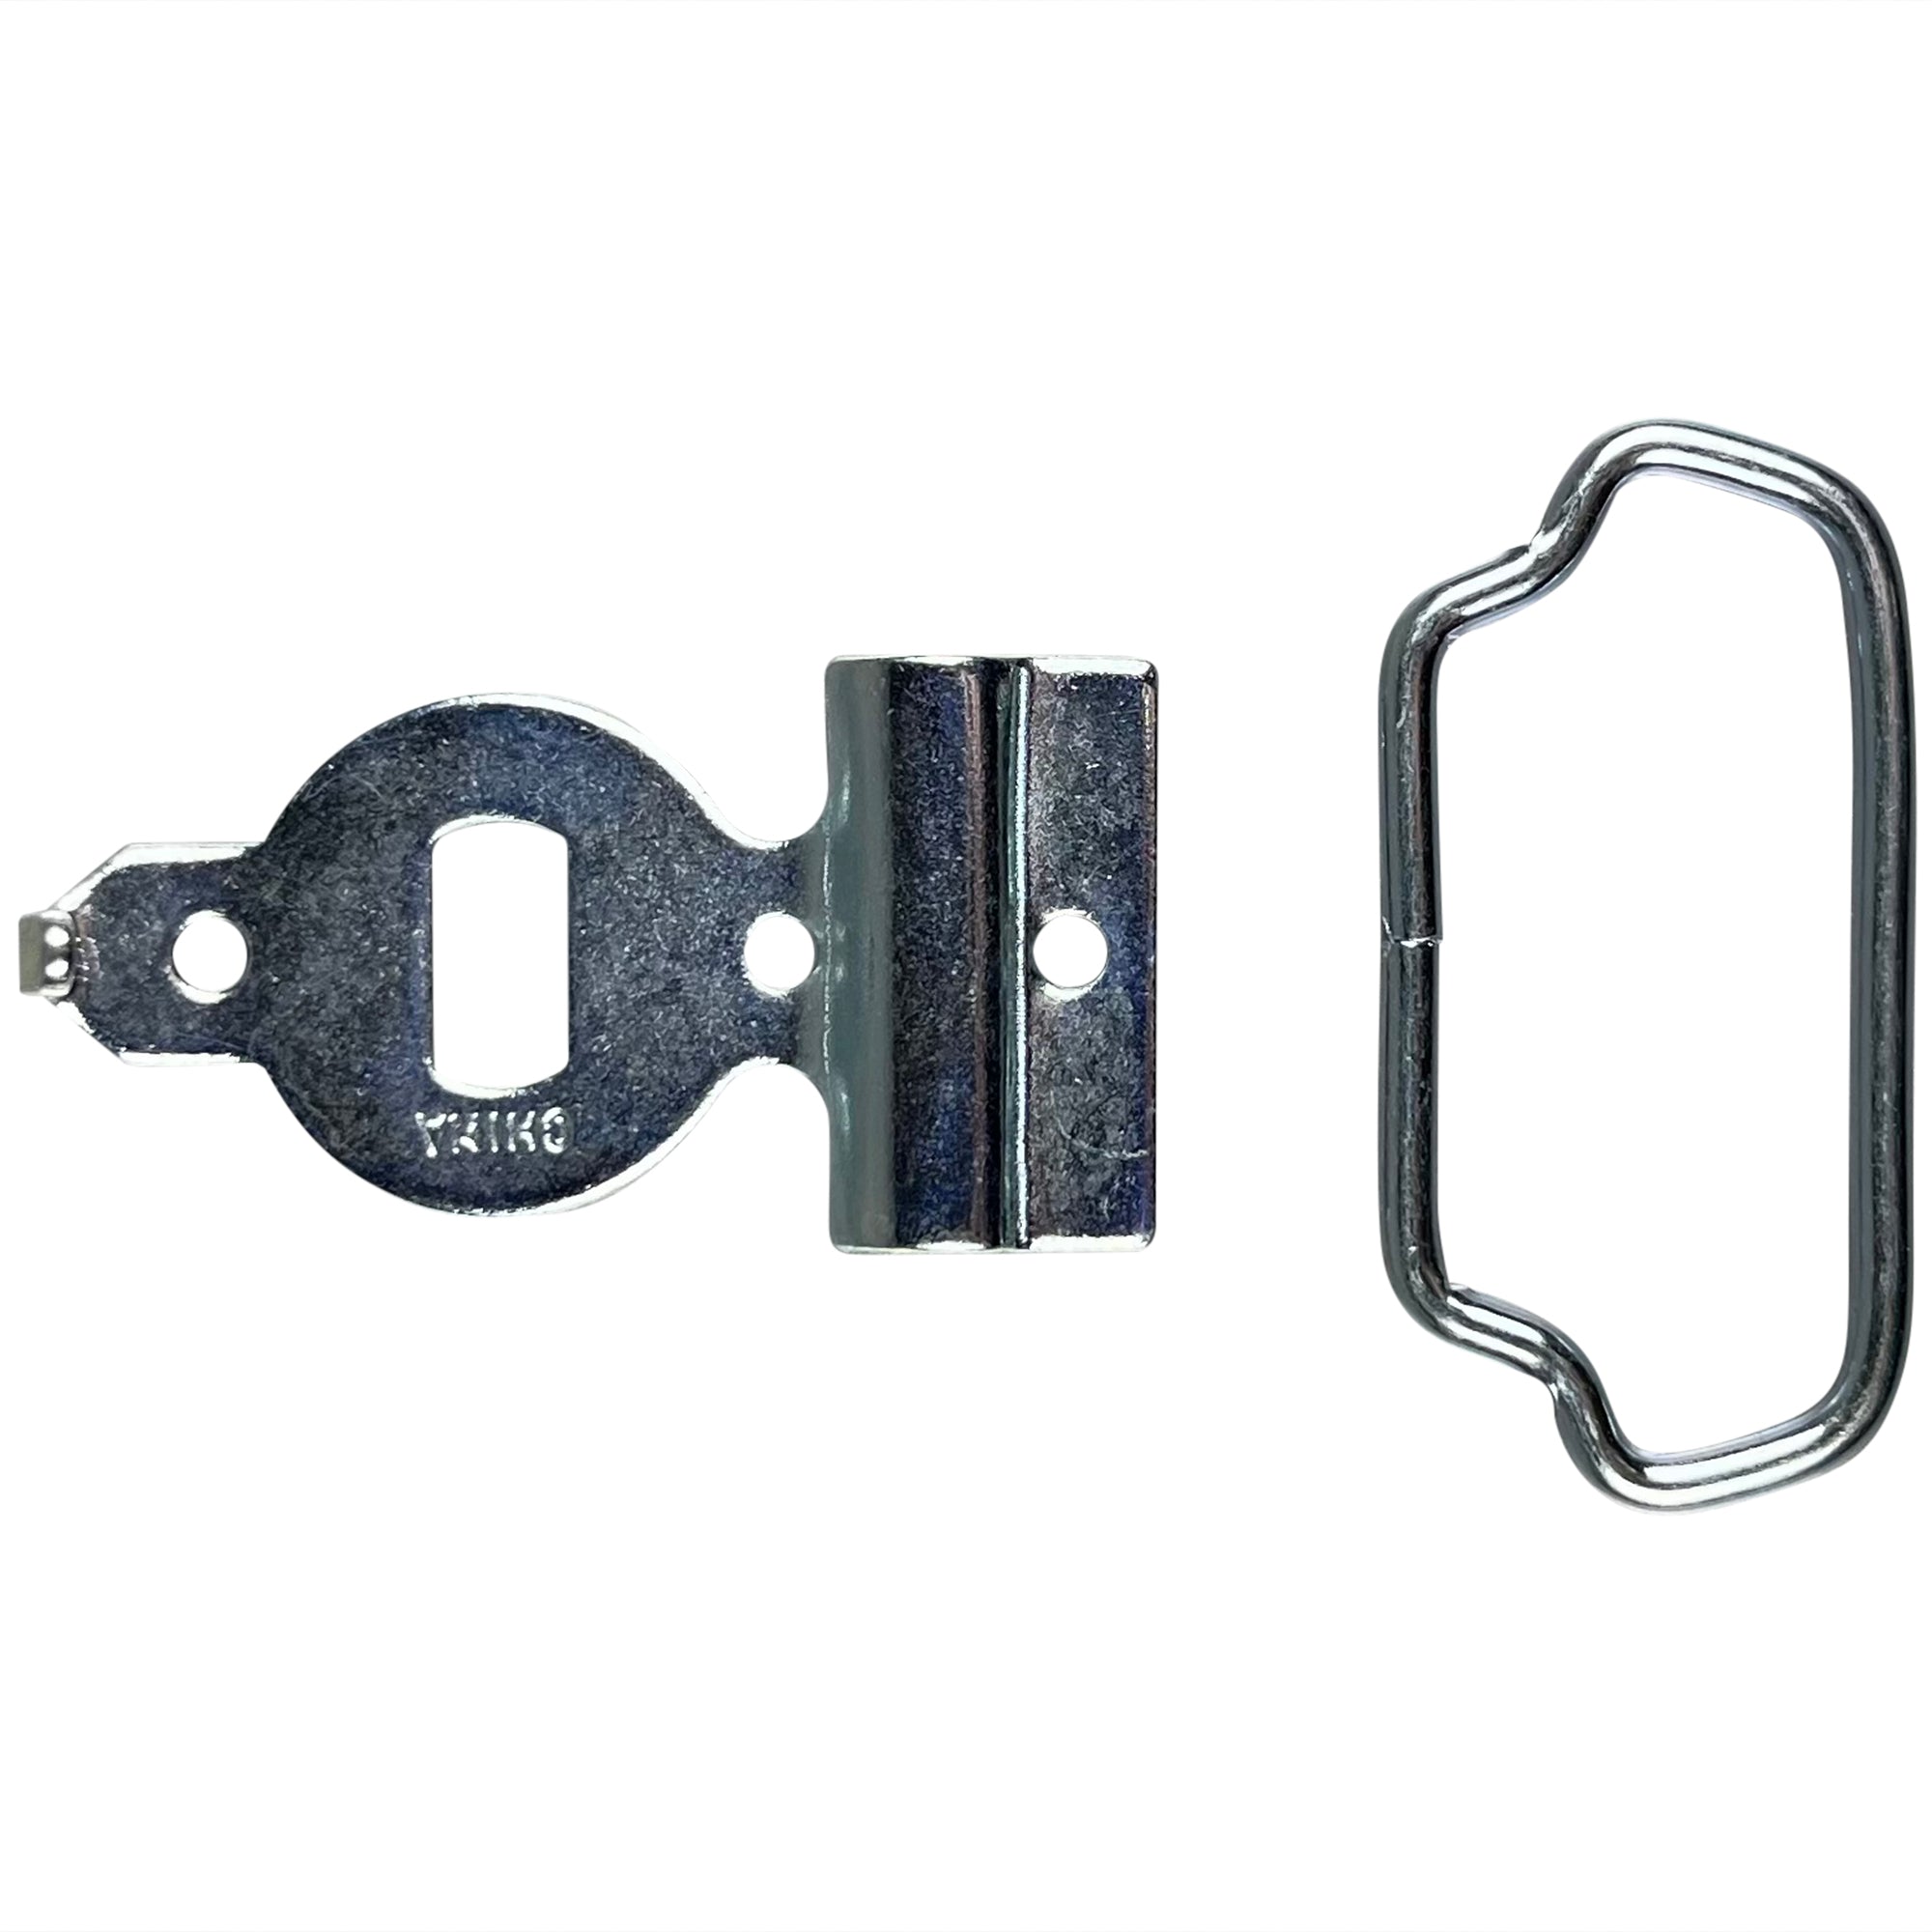 Buckle Back Ring & Hook 1-1/2 (38 mm) to 1-3/4 (44 mm)